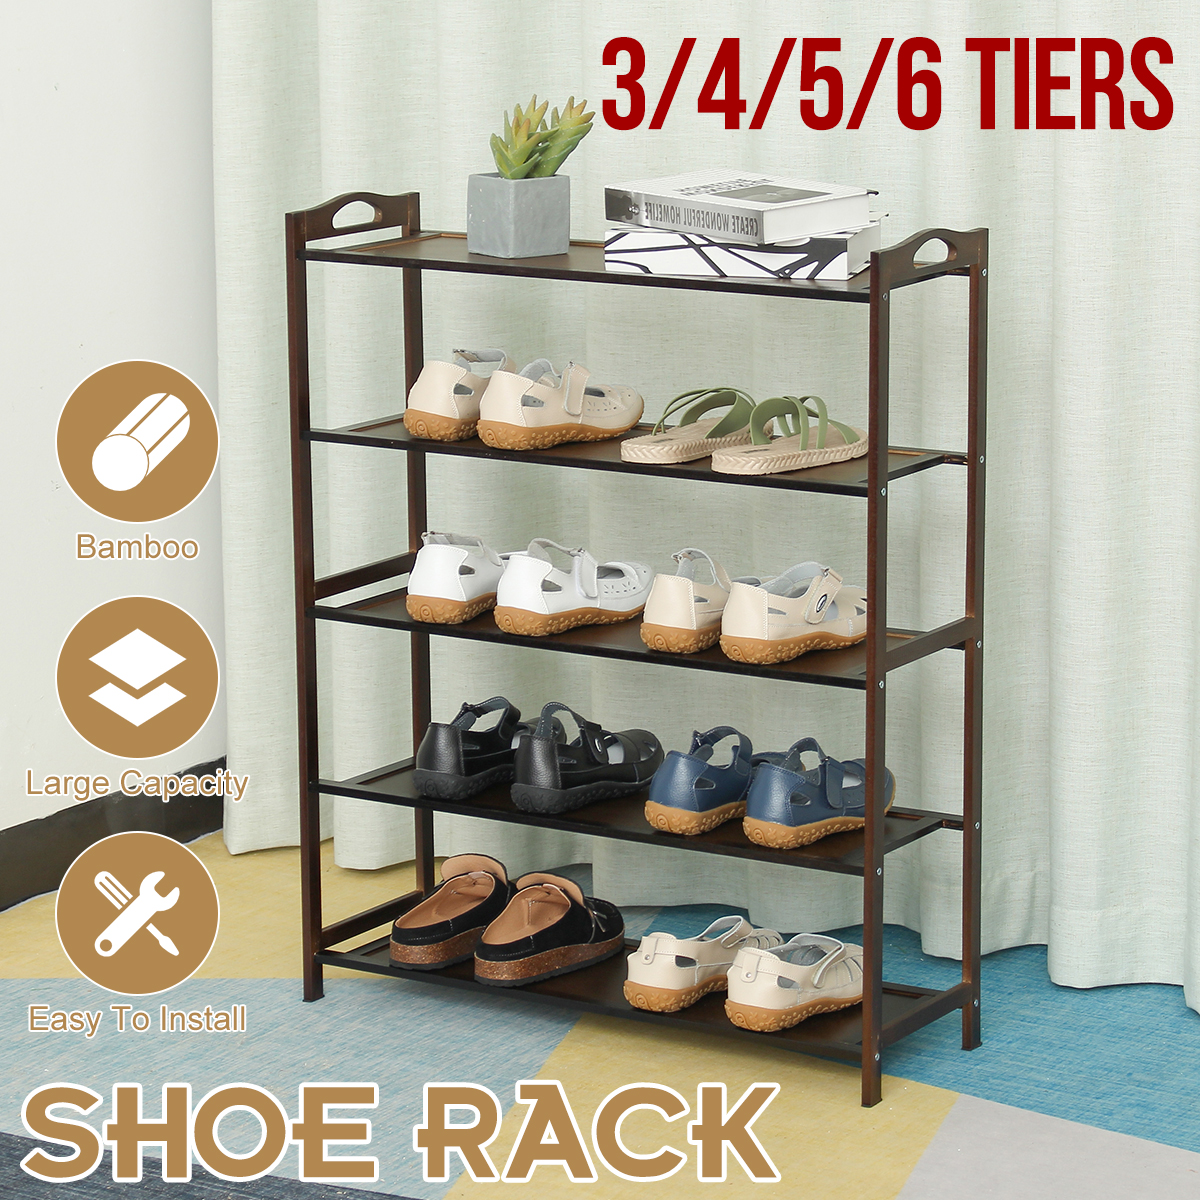 3456-Tiers-Shoe-Rack-Multi-layers-Storage-Shelf-Space-Saving-Organizer-Books-Decorations-Stand-for-H-1800948-1